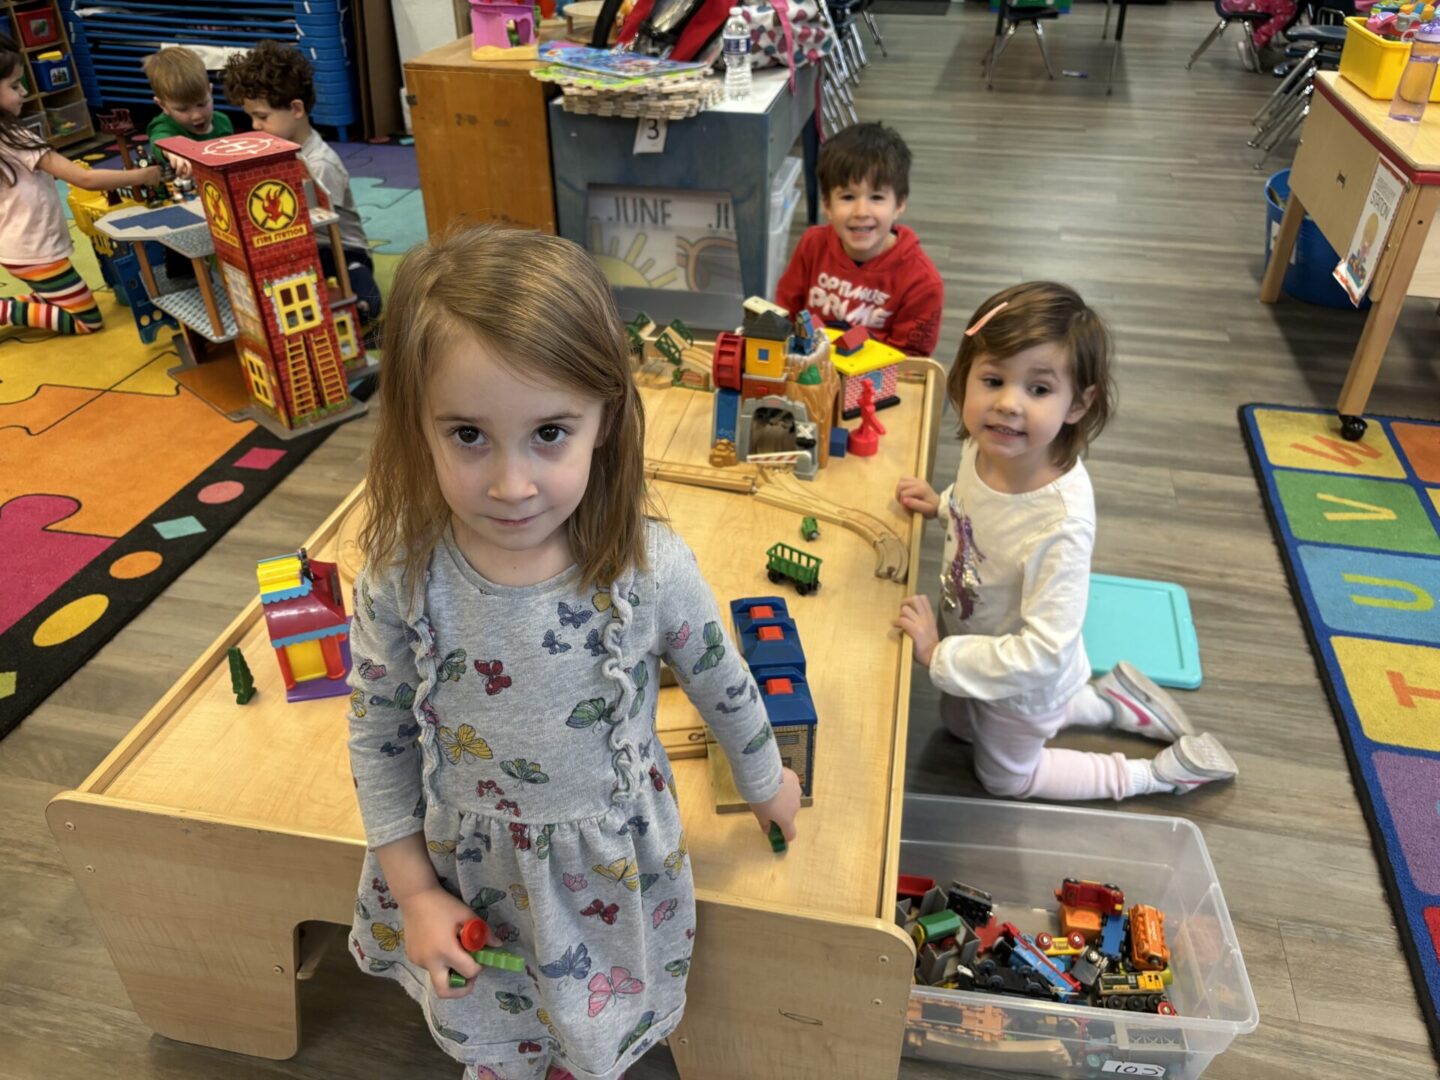 Three children are playing with toys in a room.